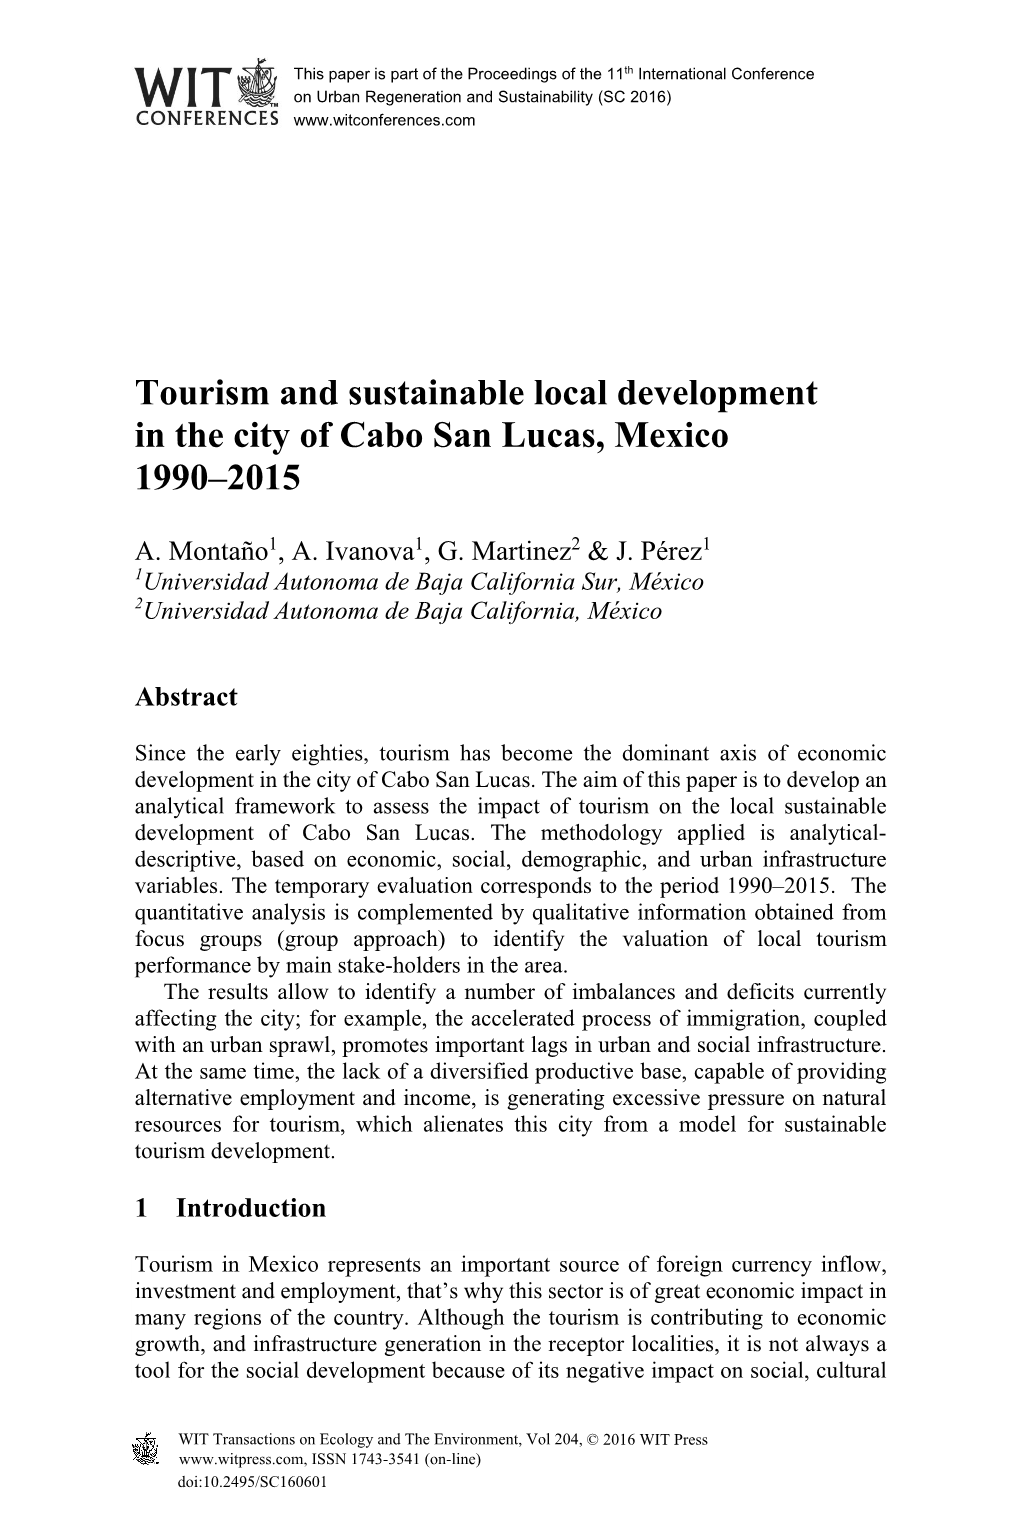 Tourism and Sustainable Local Development in the City of Cabo San Lucas, Mexico 1990–2015